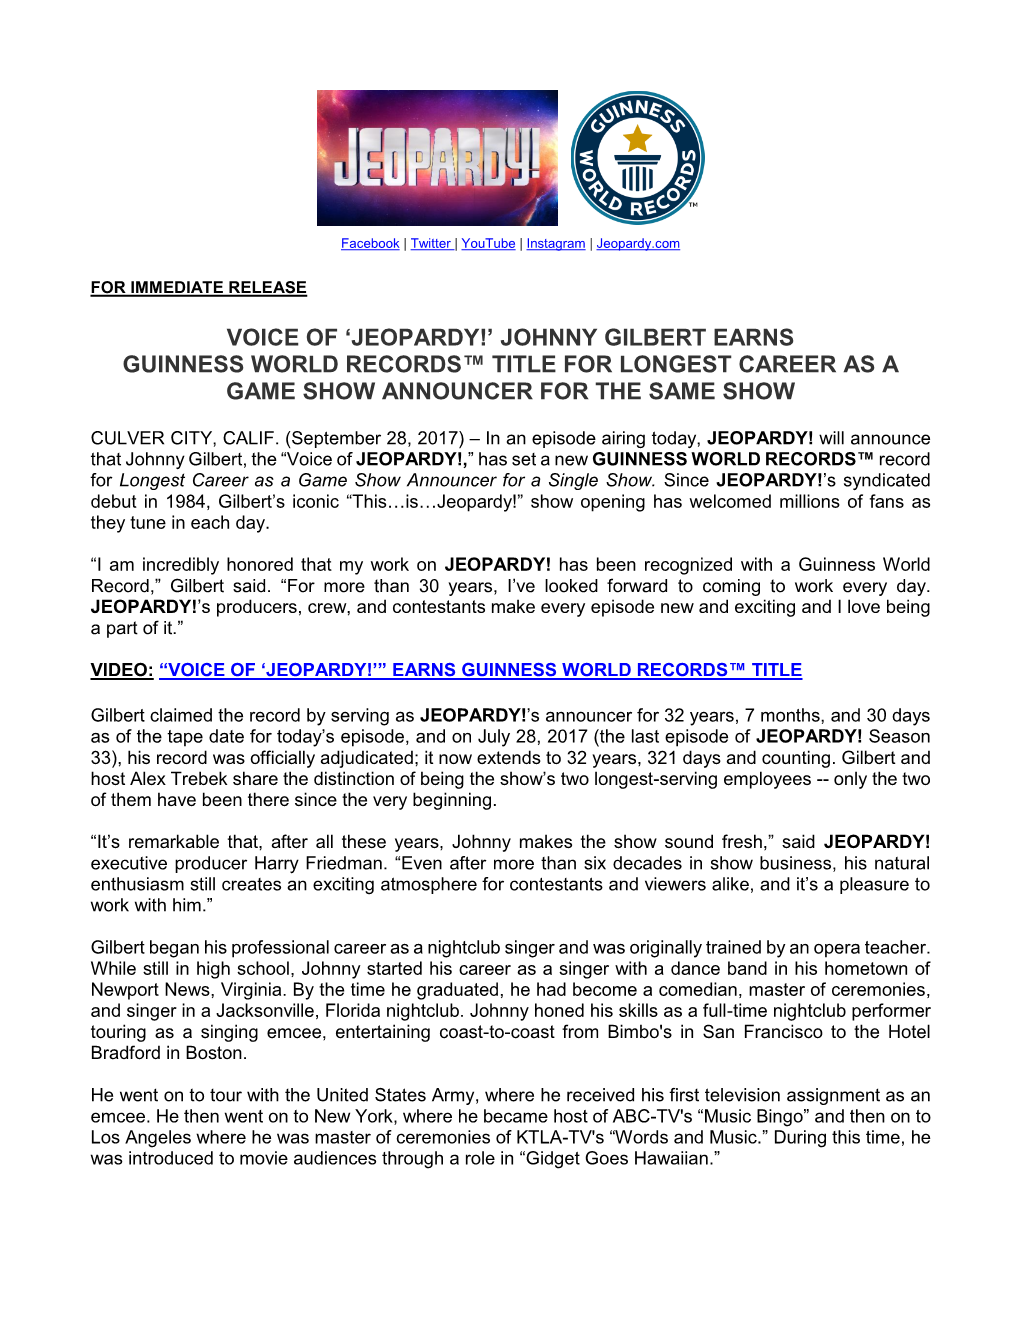 Johnny Gilbert Earns Guinness World Records™ Title for Longest Career As a Game Show Announcer for the Same Show